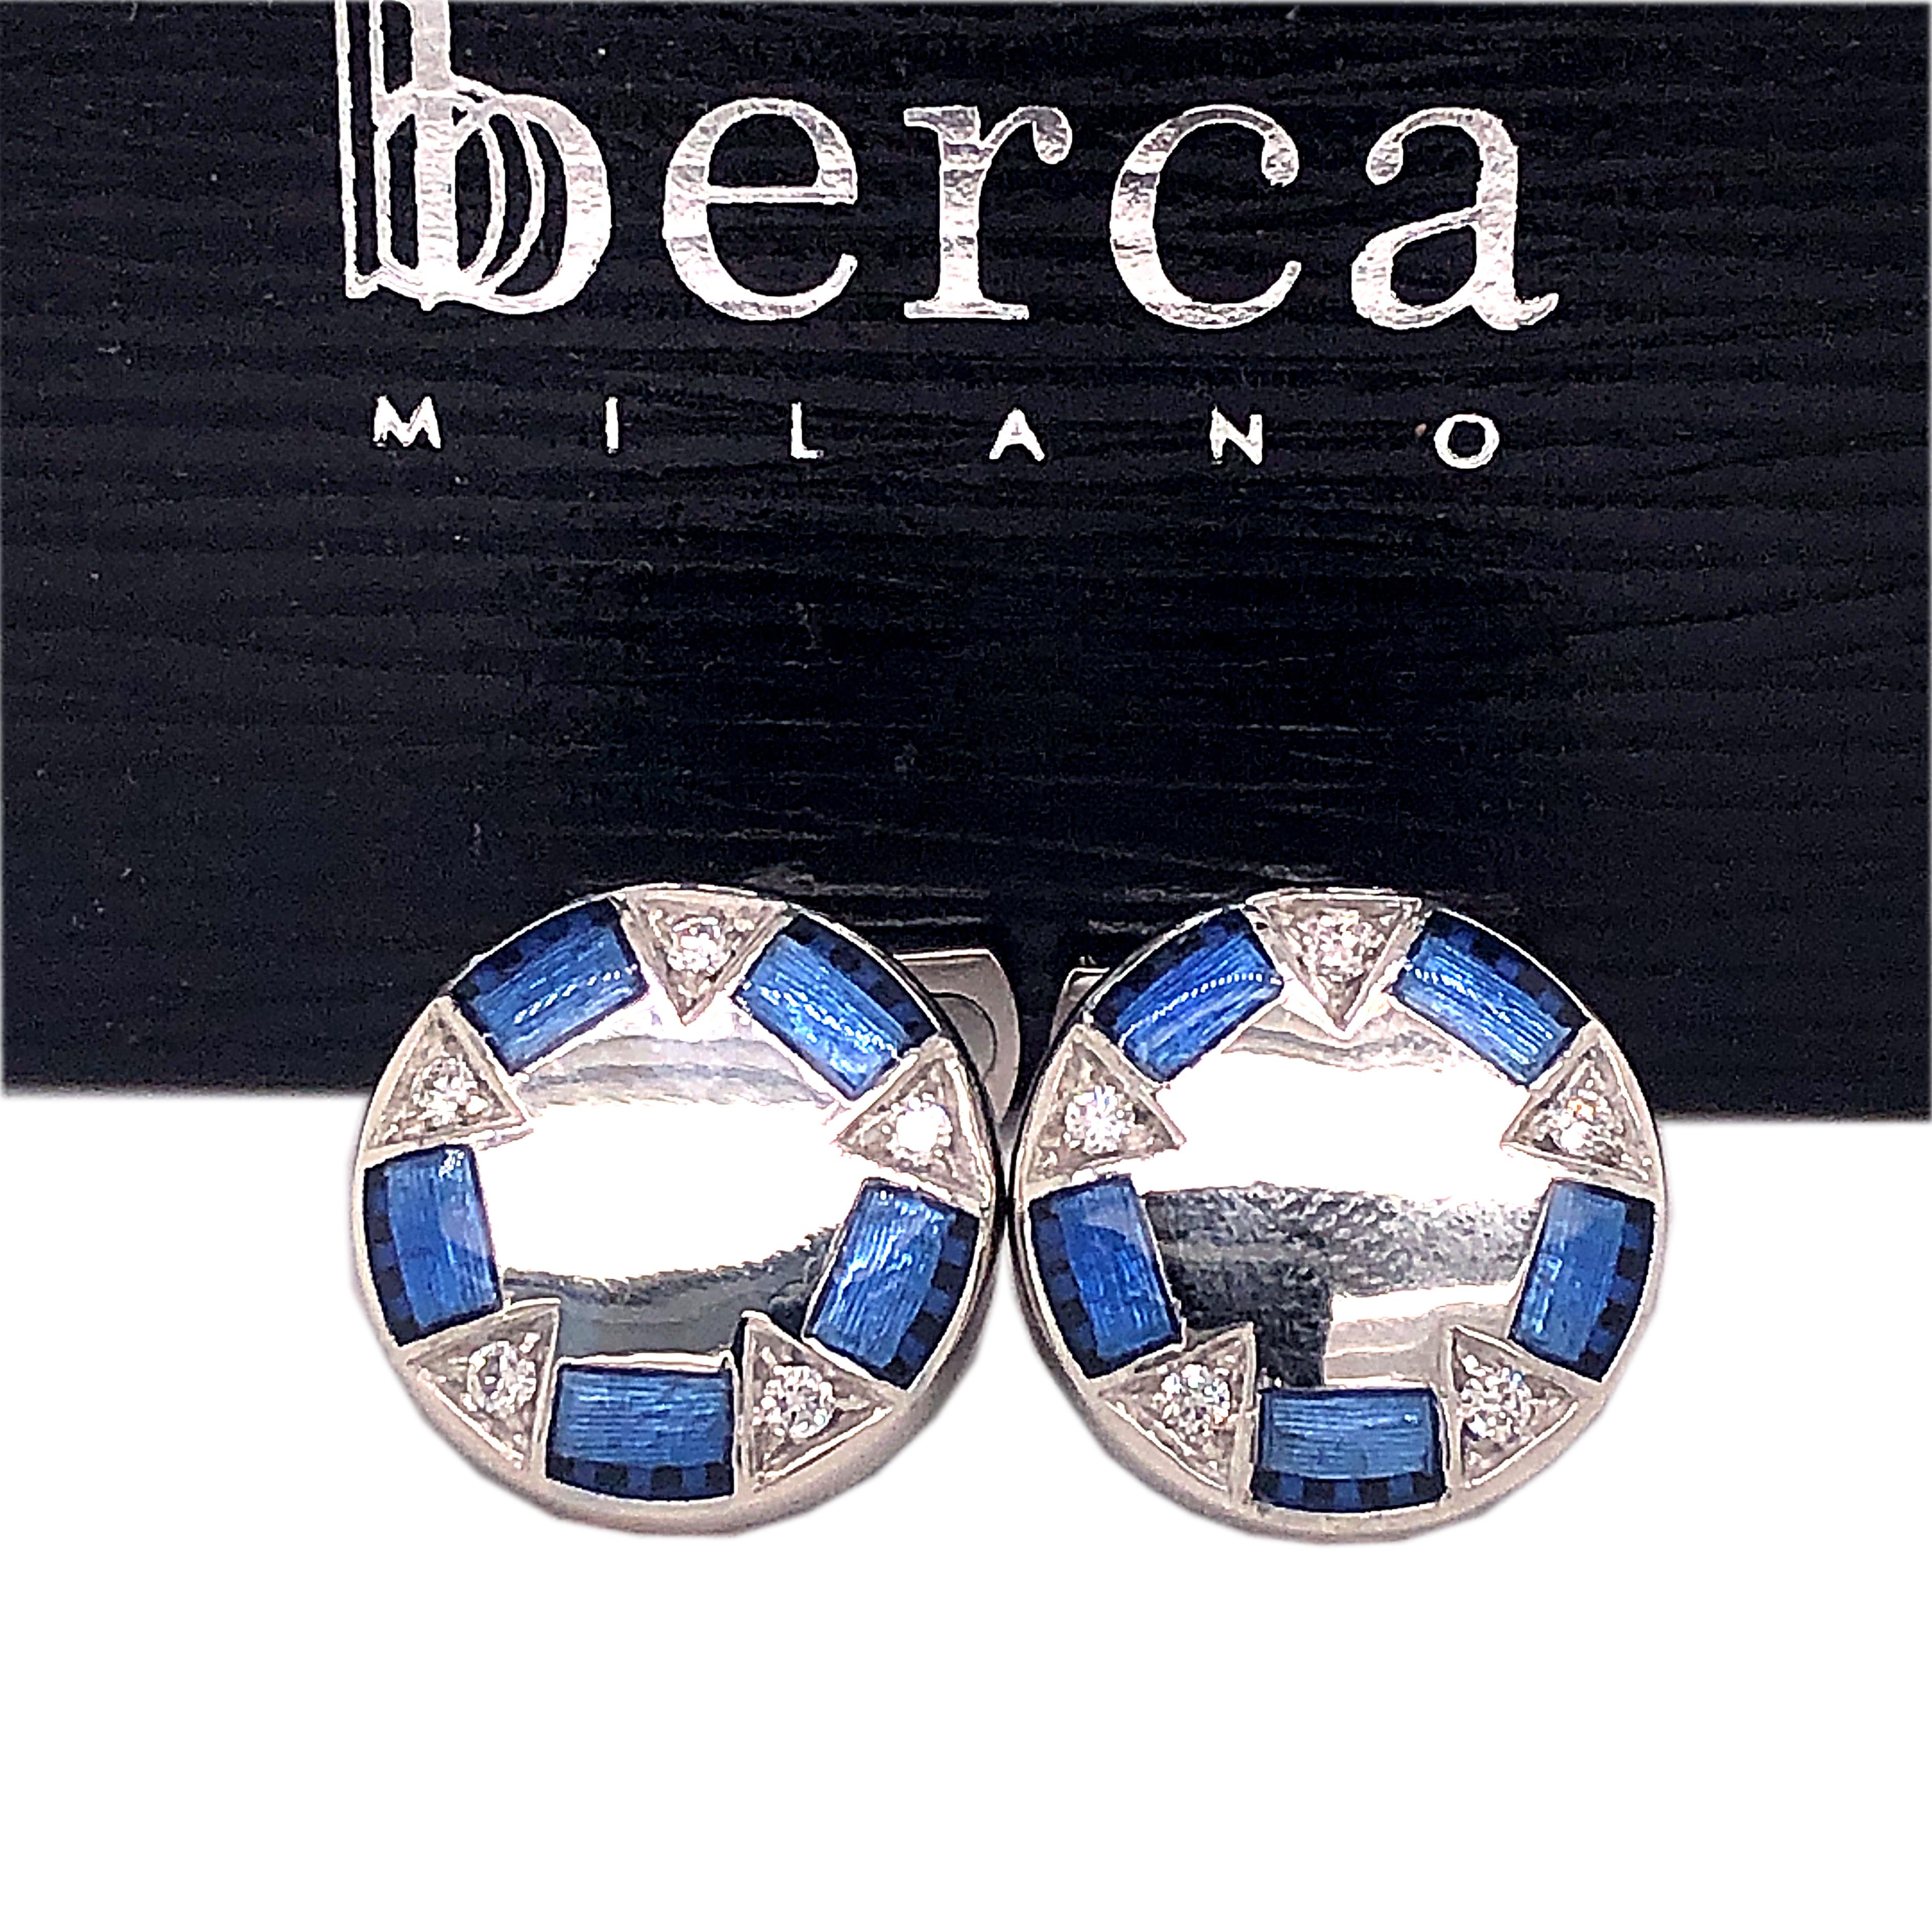 Chic yet Timeless 0.20 Carat D-E White Diamond combined with Navy Blue Hand Enameled Lunettes in a Precious 950 Platinum Setting Round Shaped Cufflinks, T-Bar Back.
Delivered to your door in a smart fitted black box and pouch.
